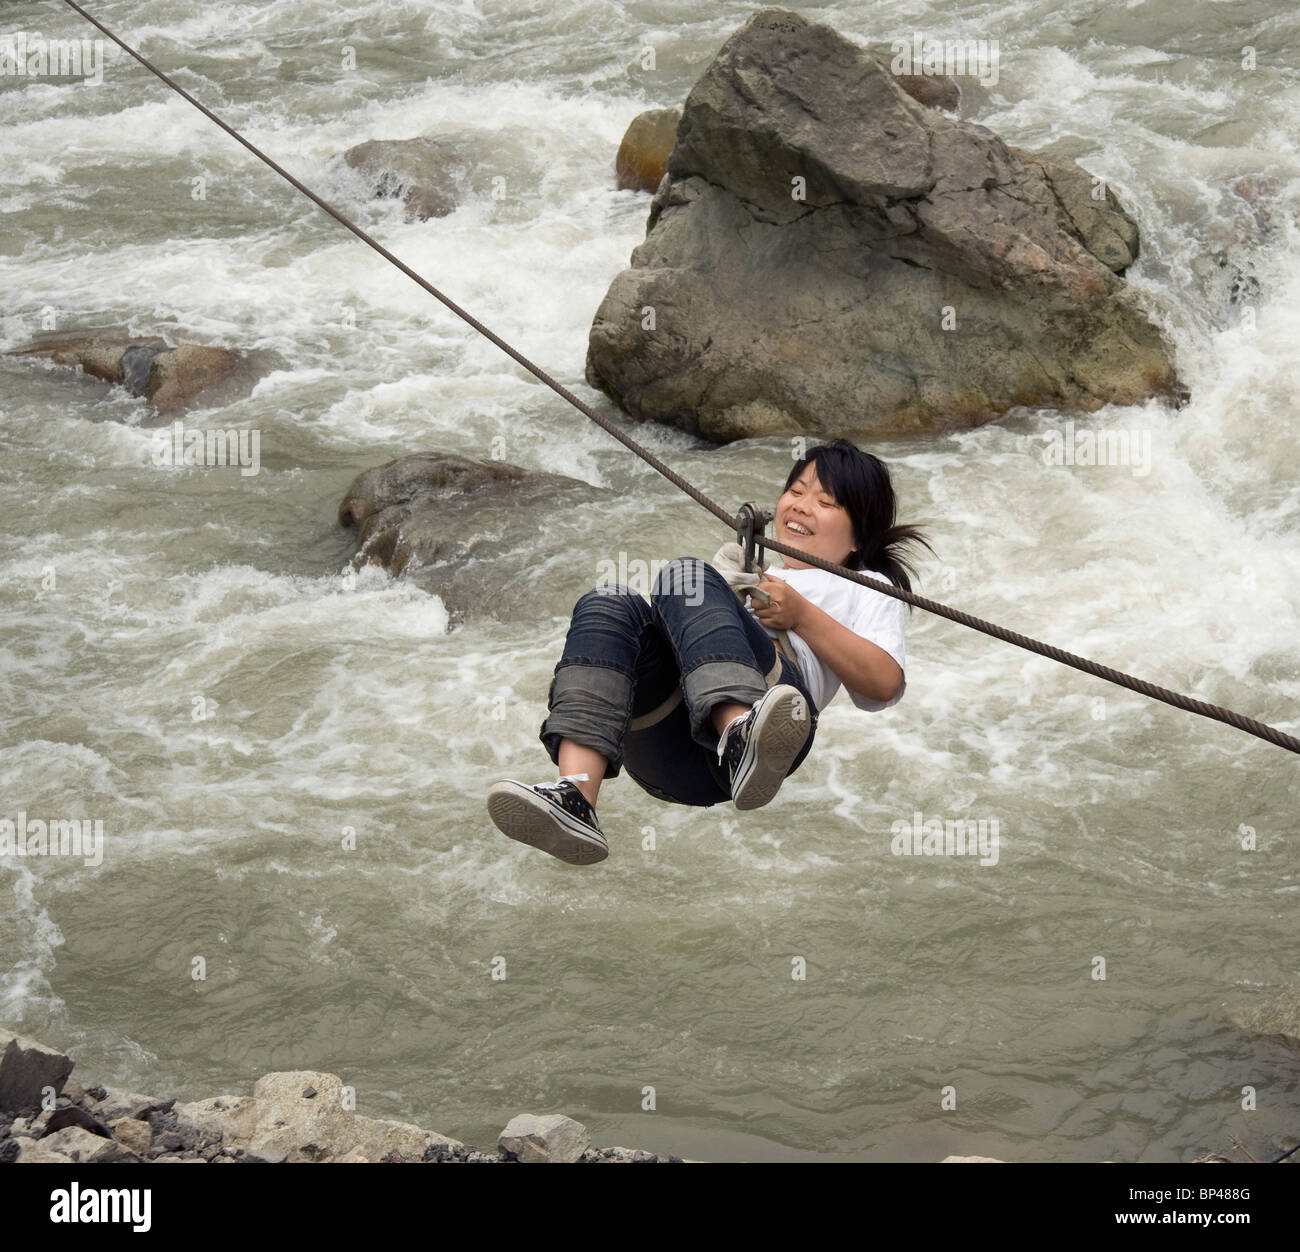 Crossing the Pitiao River, Wolong on a zip wire Stock Photo